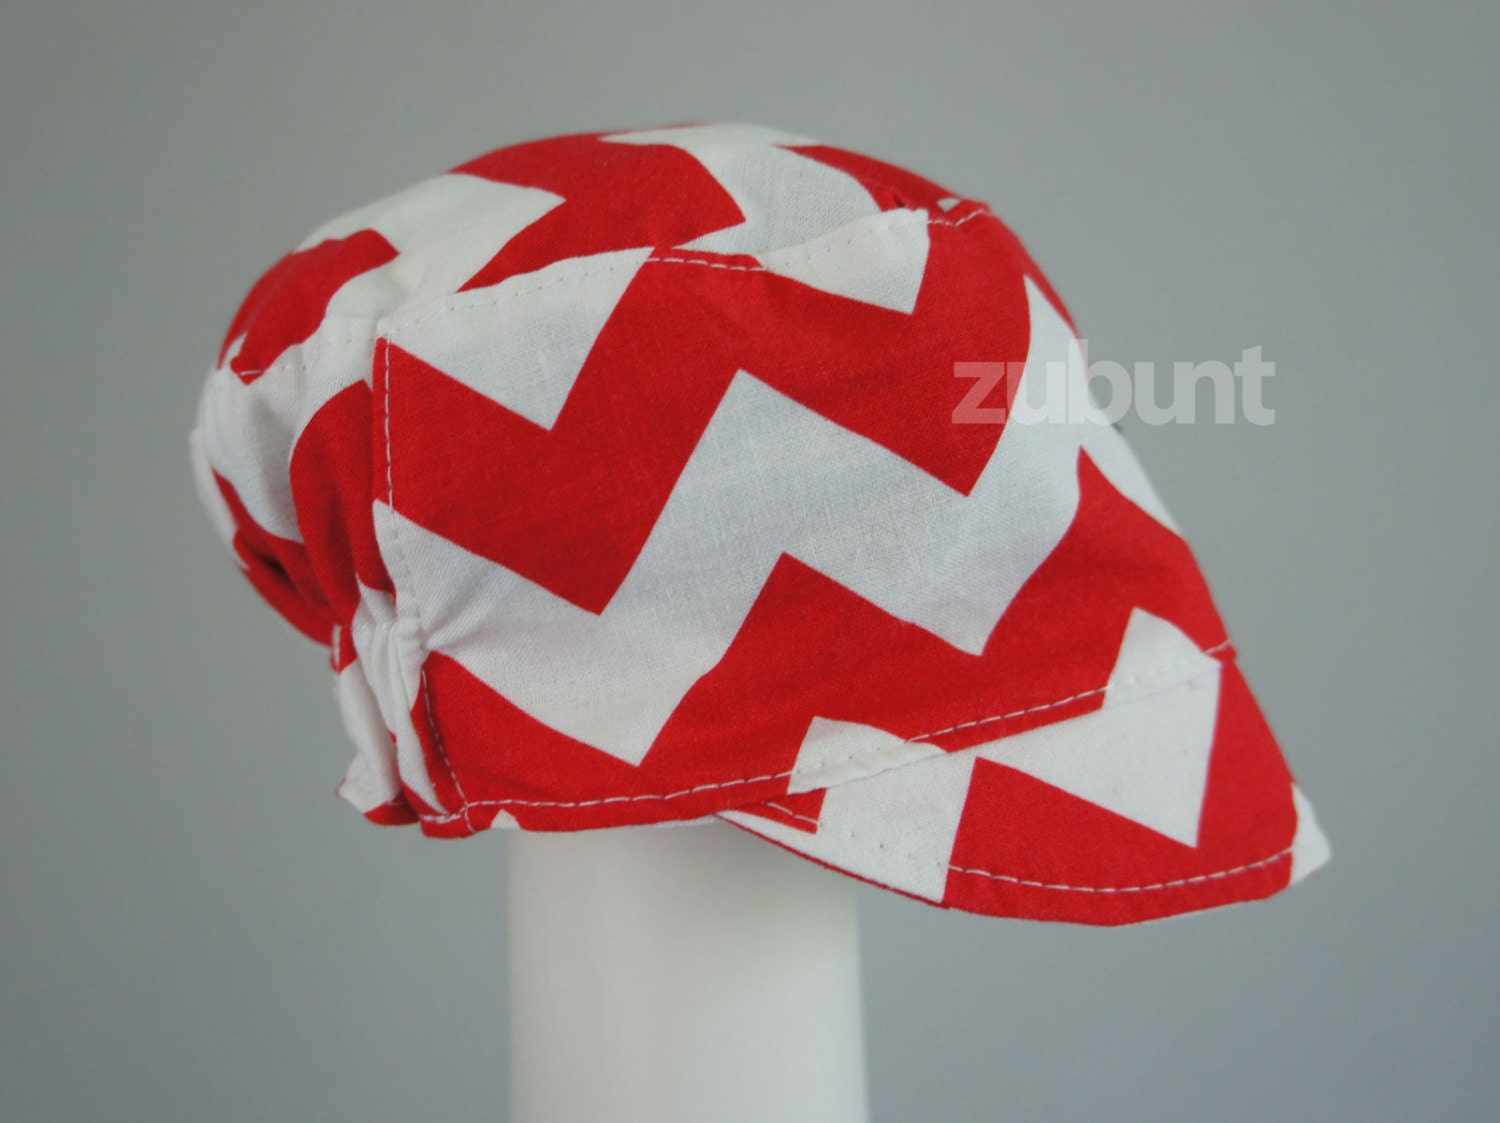 Red chevron summer hat for boys and girl size S - zubunt